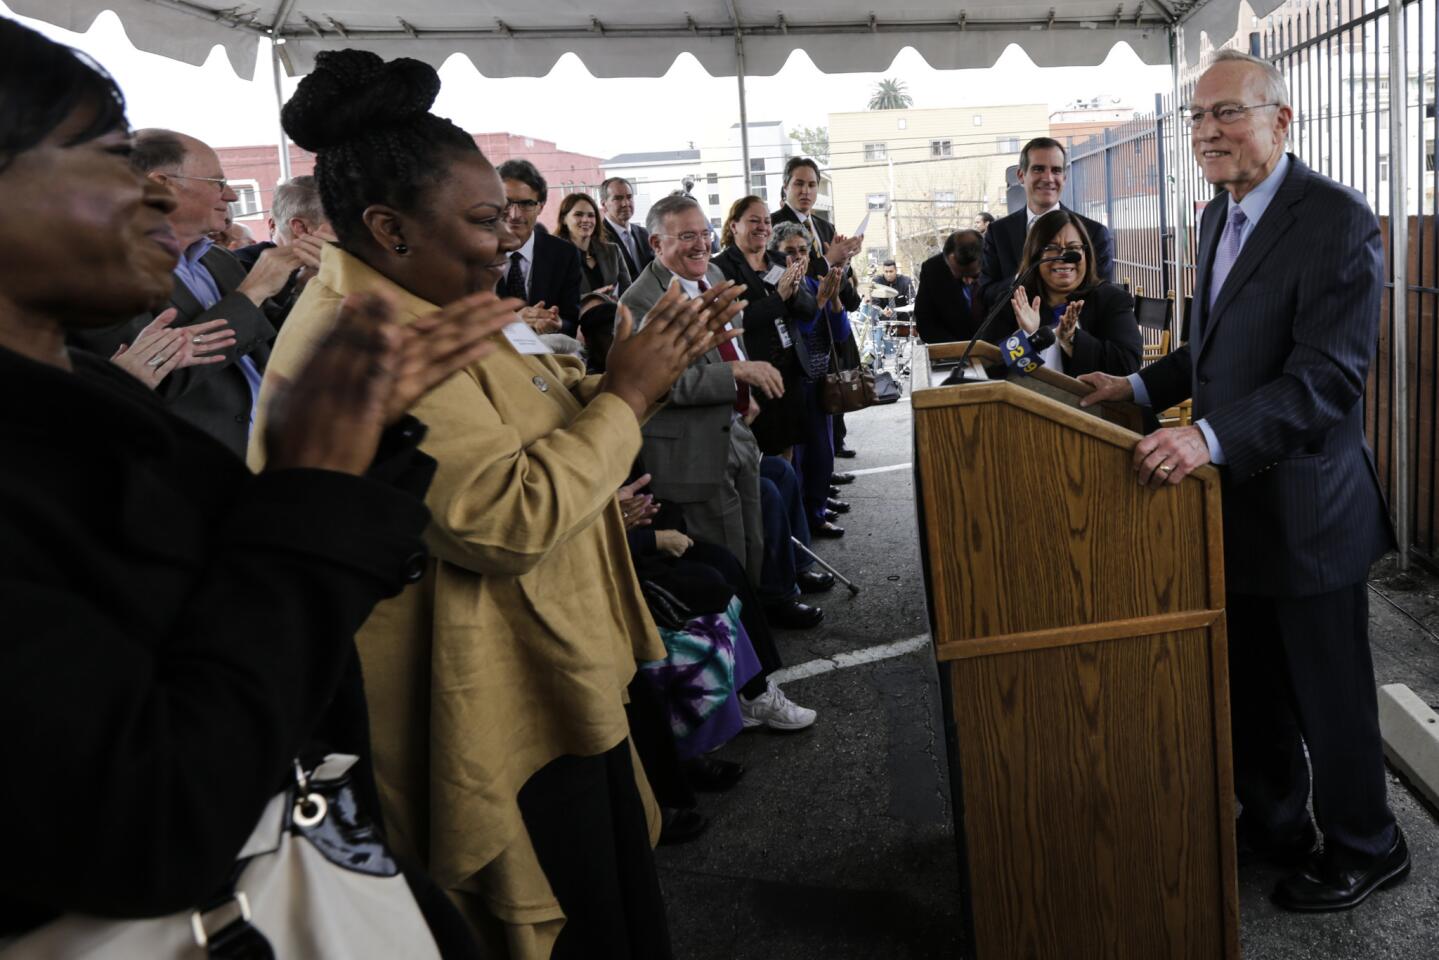 Ron Olson, right, gets a standing ovation at the groundbreaking ceremony of the Ron Olson Justice Center, named after him, at the corner of 8th Street and Union Avenue in Los Angeles.